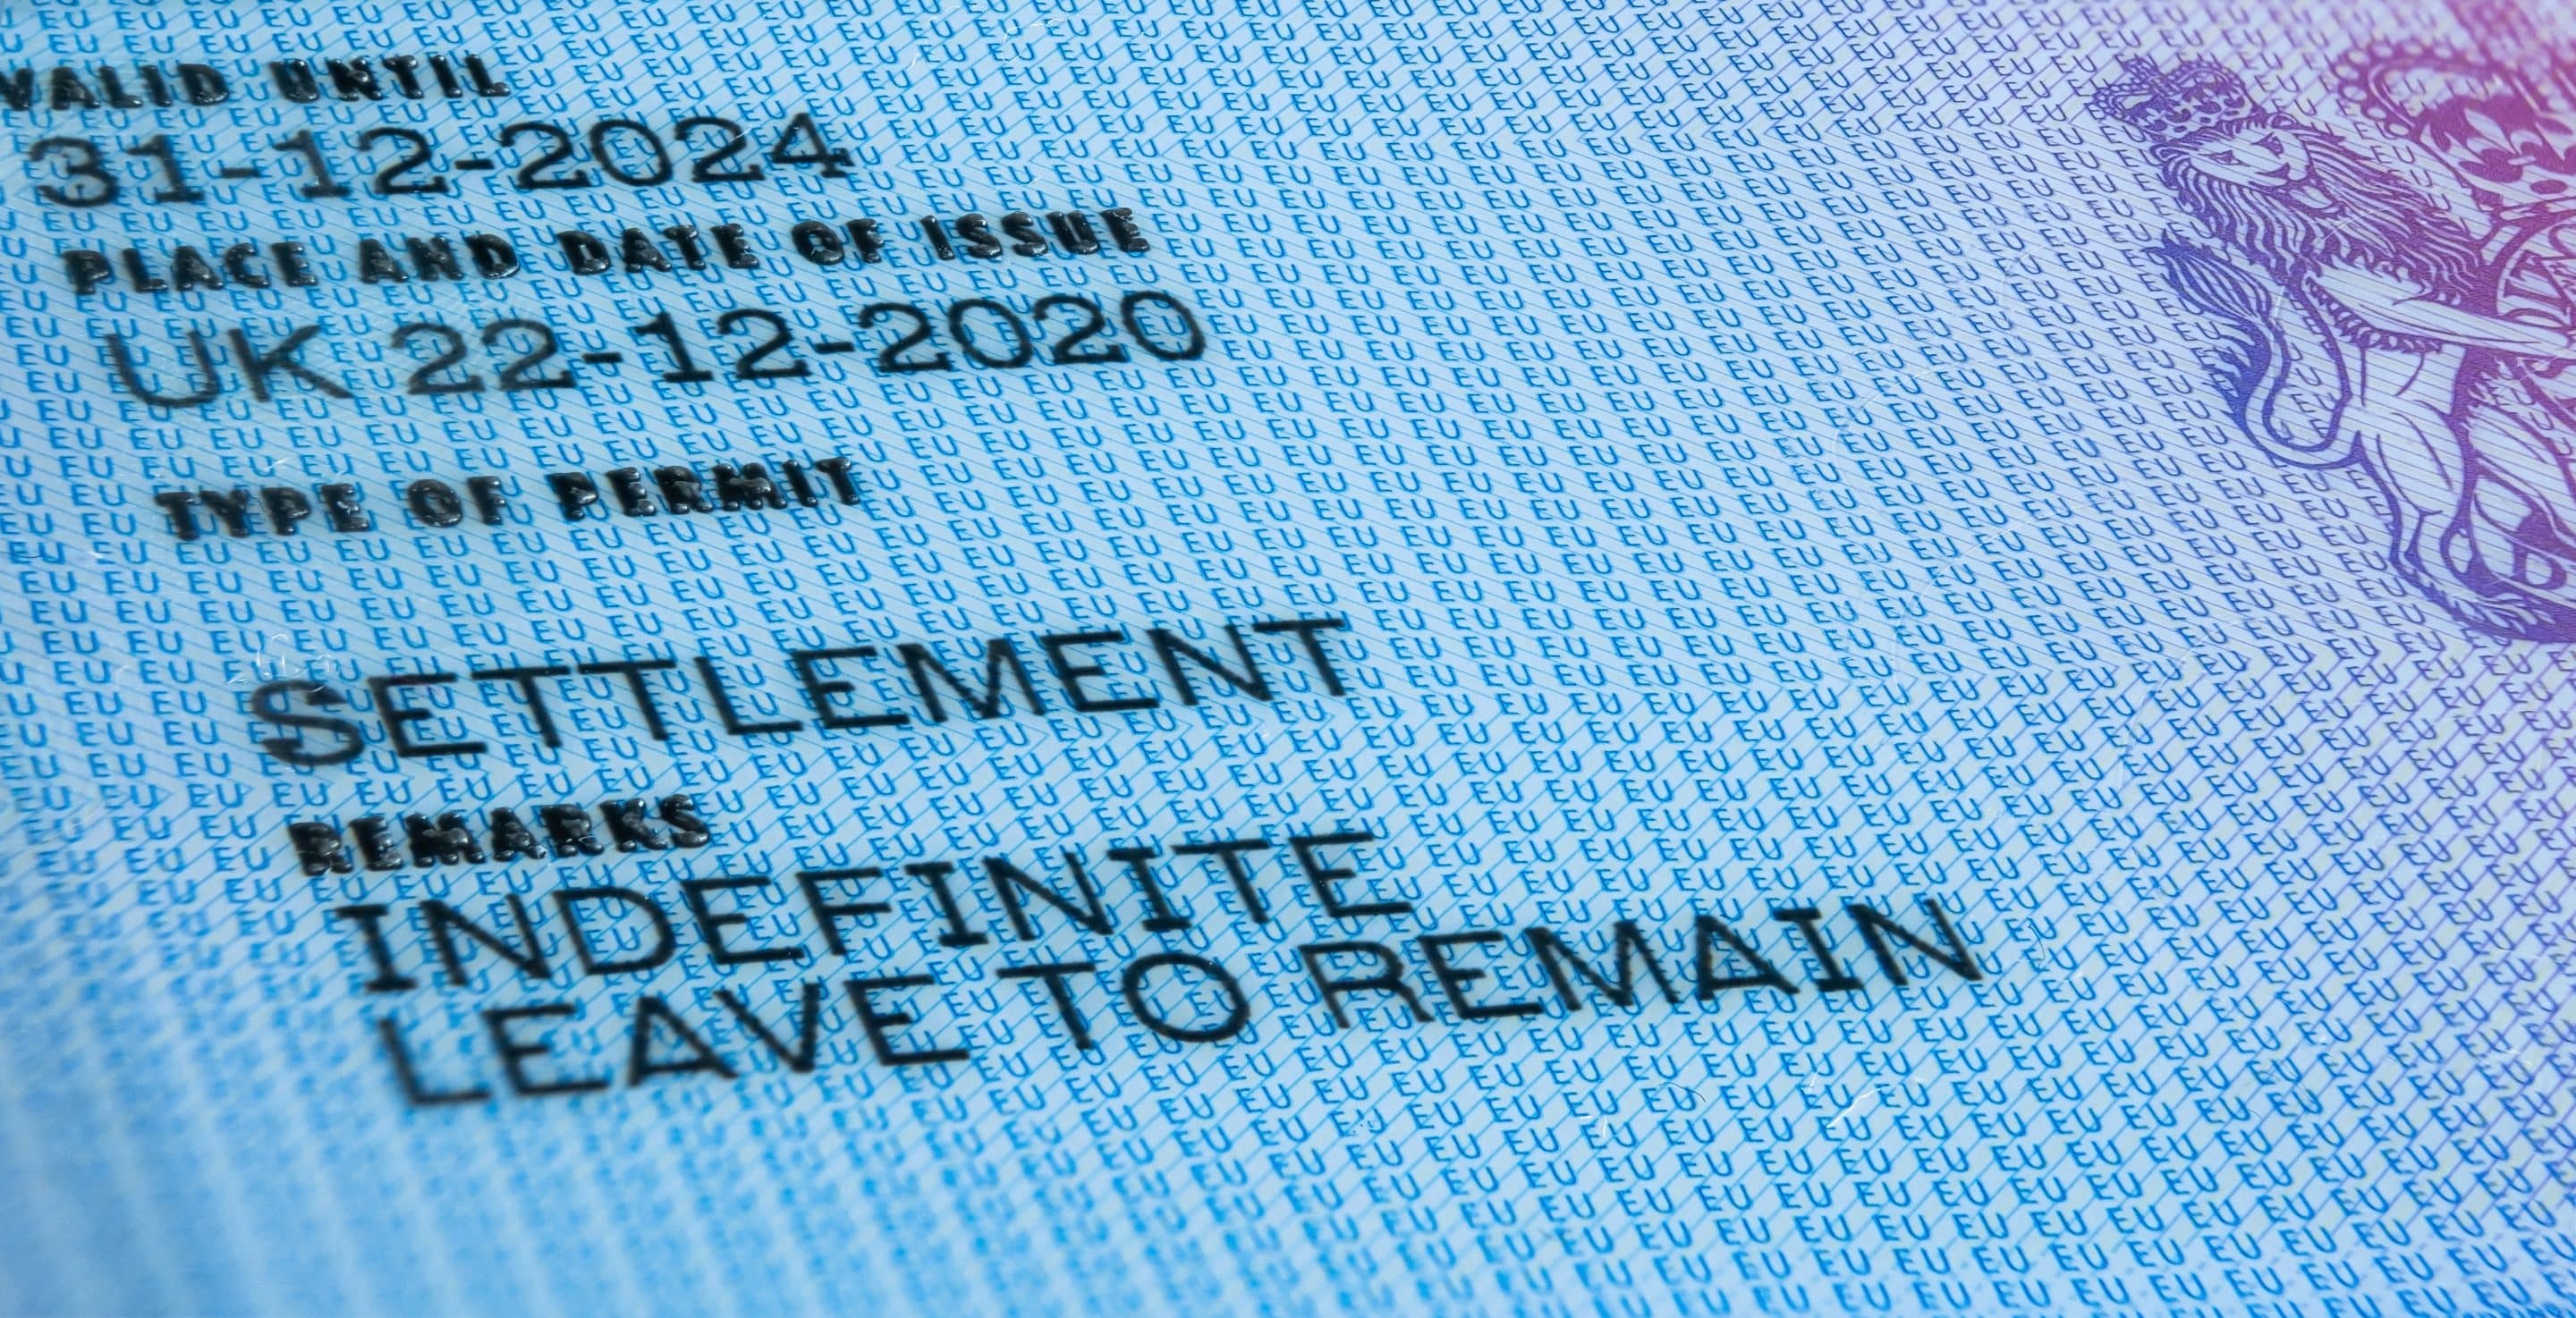 If you have indefinite leave to remain you can use the biometric residence permit replacement service within the UK.